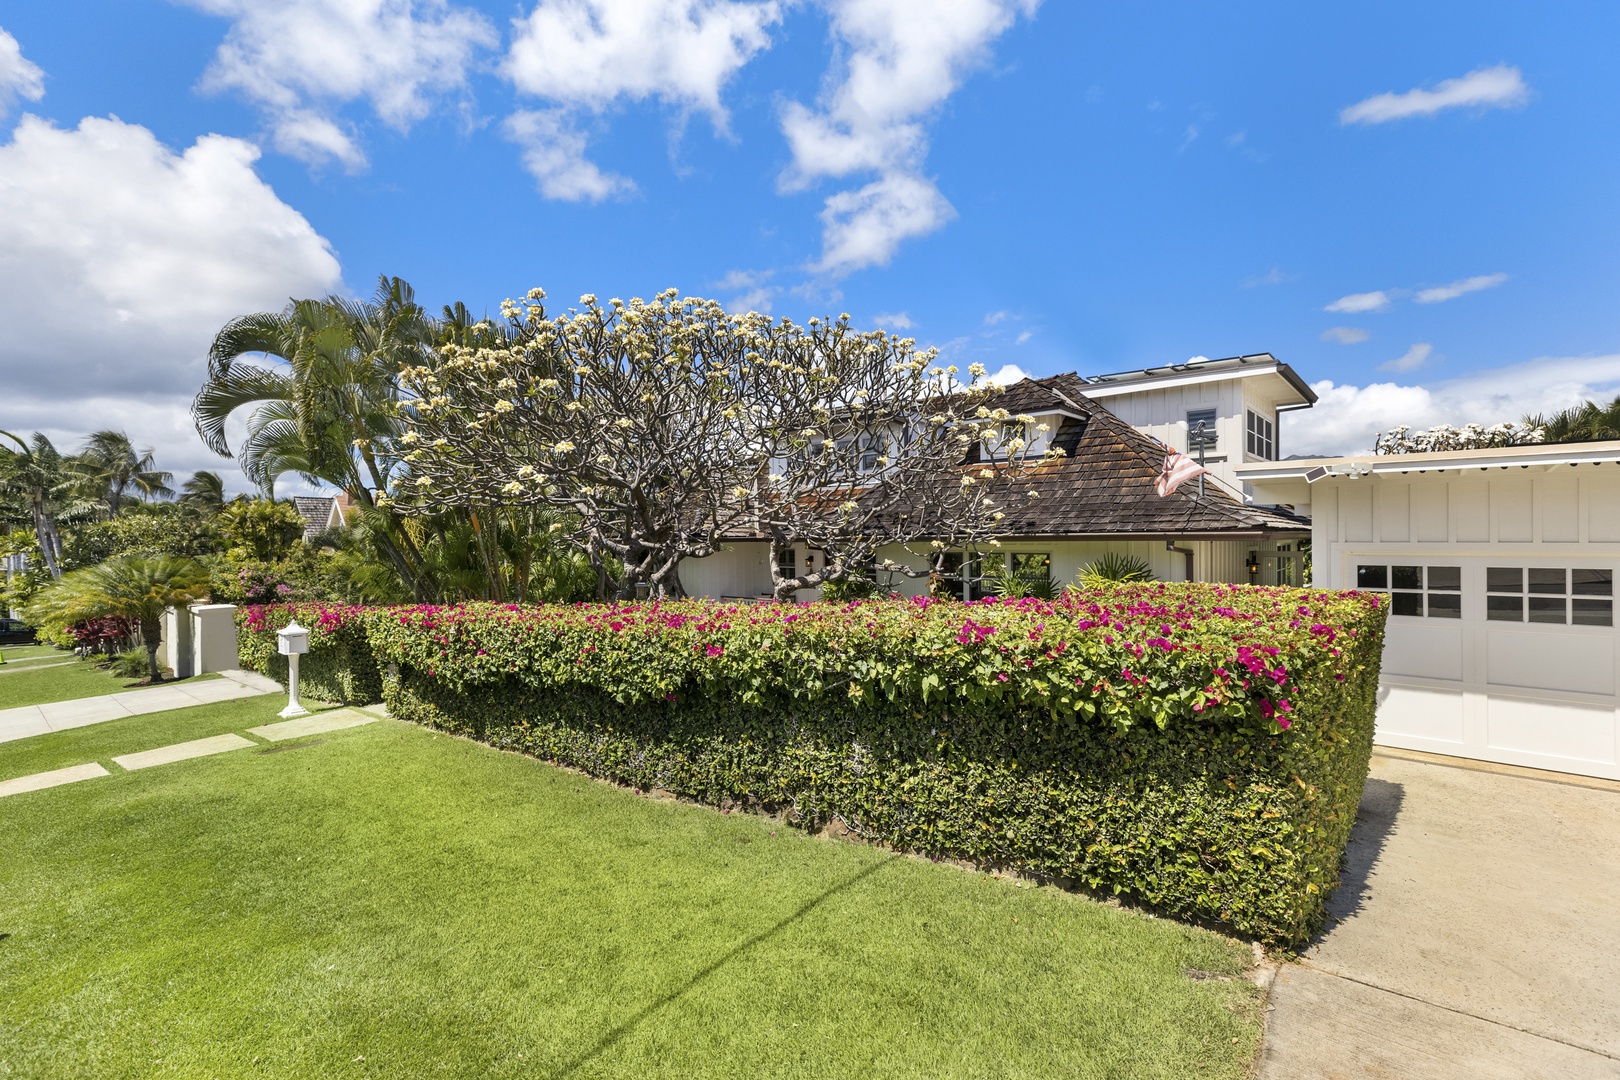 Honolulu Vacation Rentals, Hale Le'ahi - Gardens give you privacy